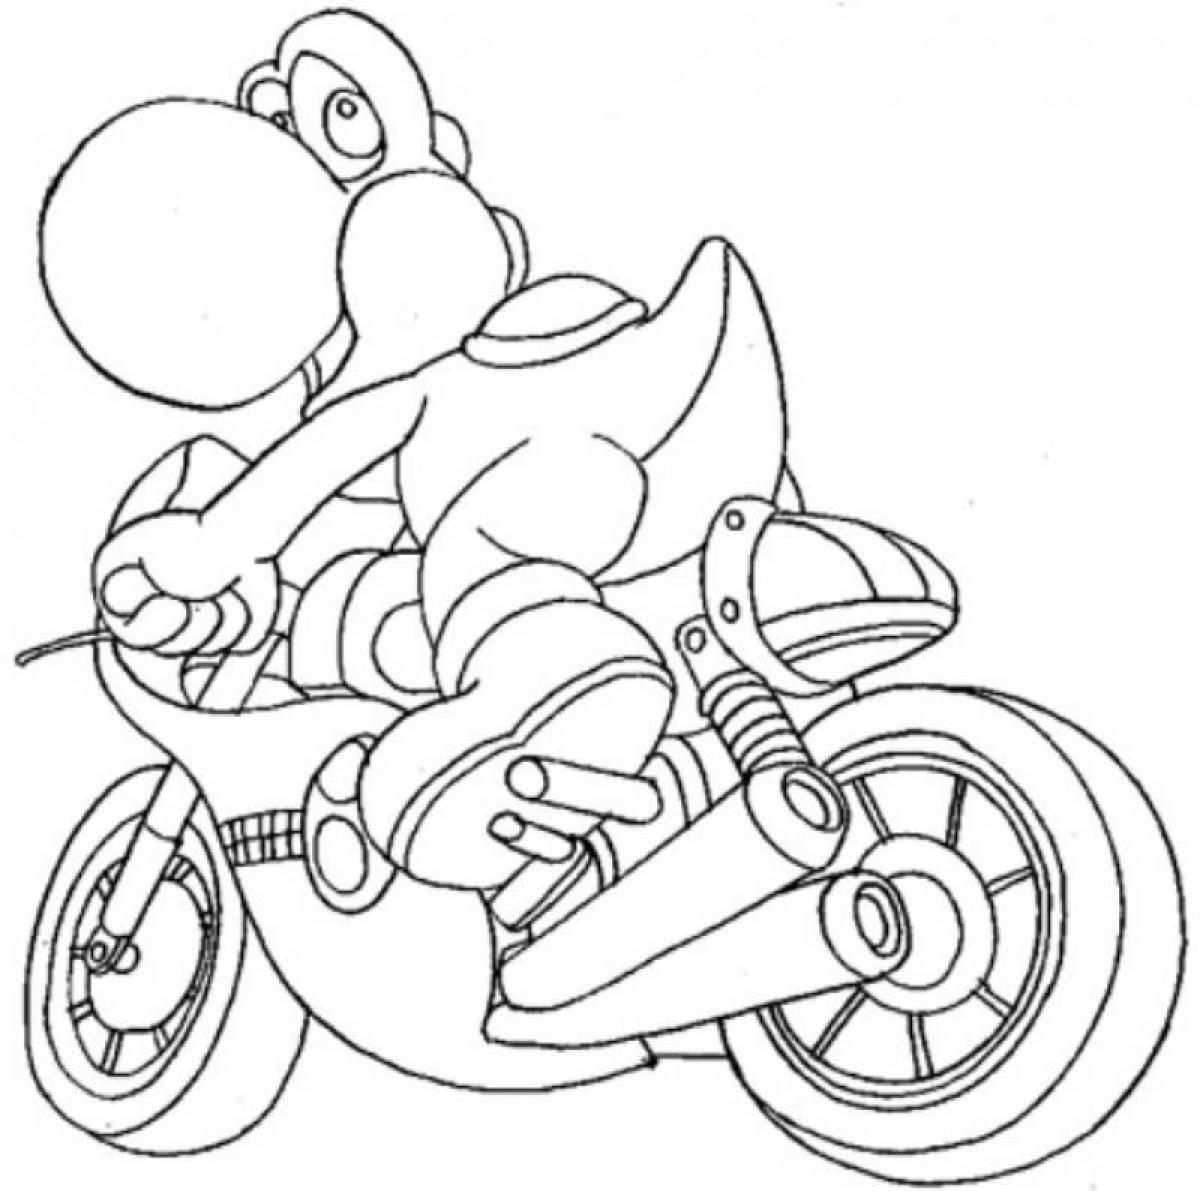 Yoshi Coloring Pages Riding Motorcycle Max Super Mario Super Mario Coloring Pages Mar